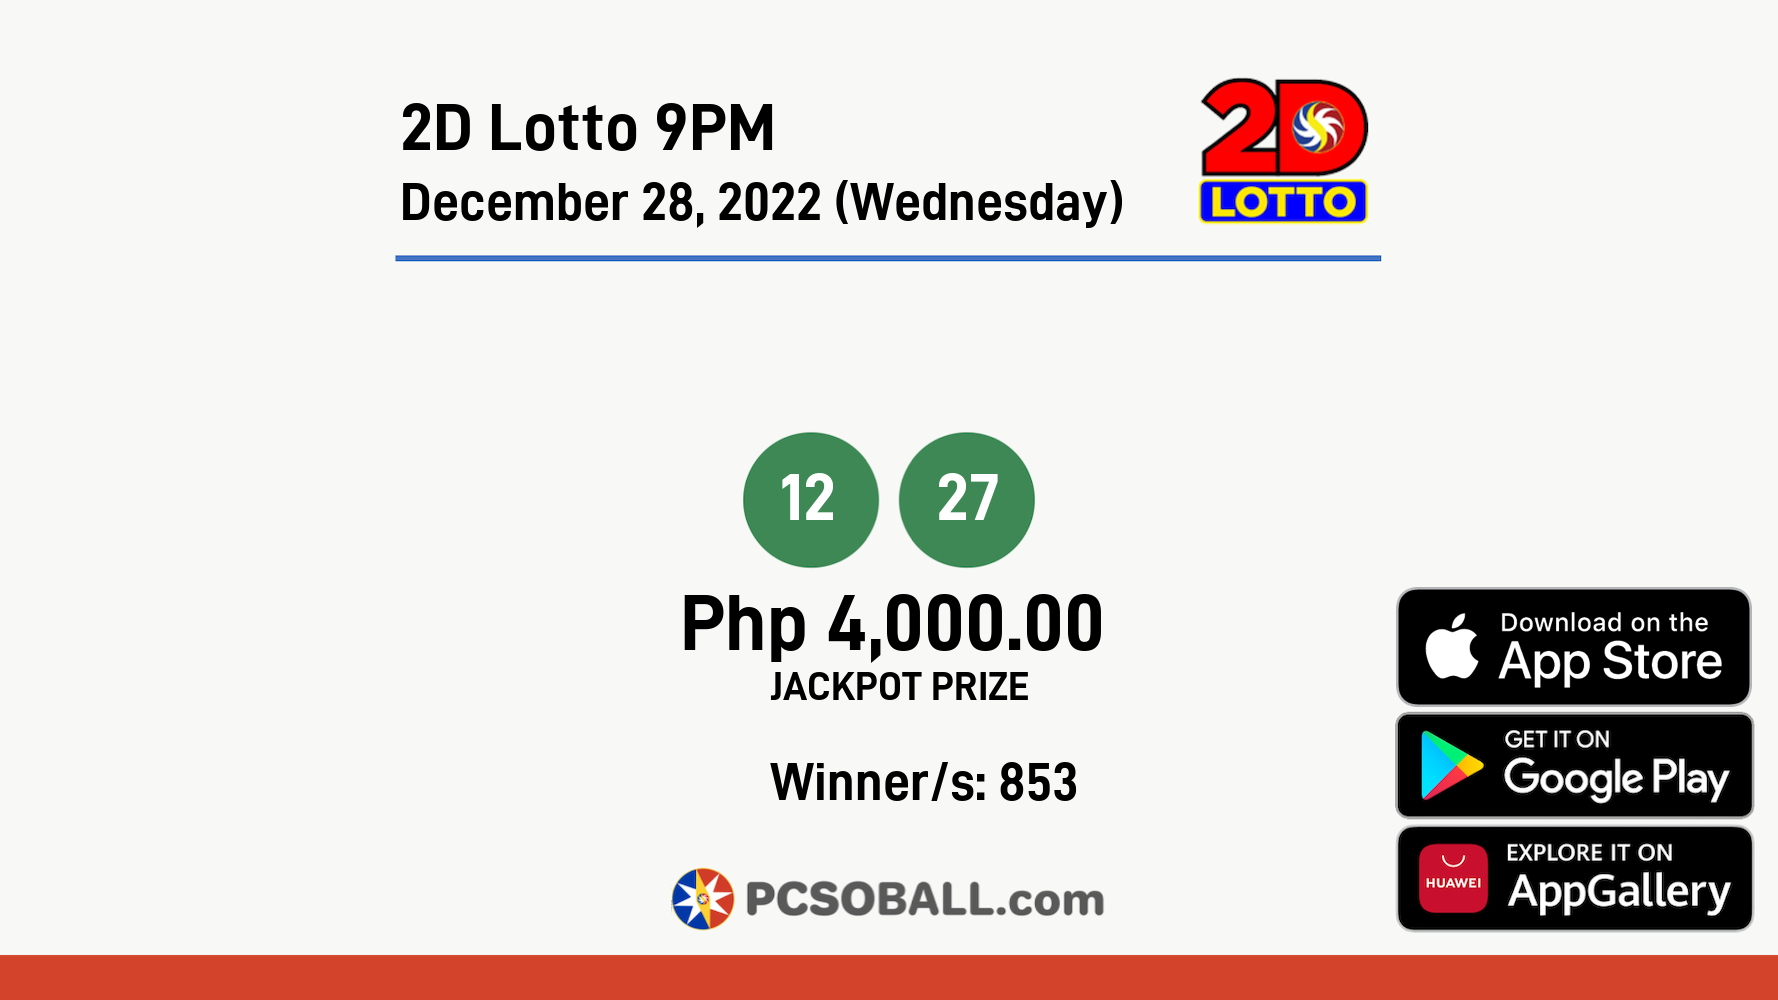 2D Lotto 9PM December 28, 2022 (Wednesday) Result